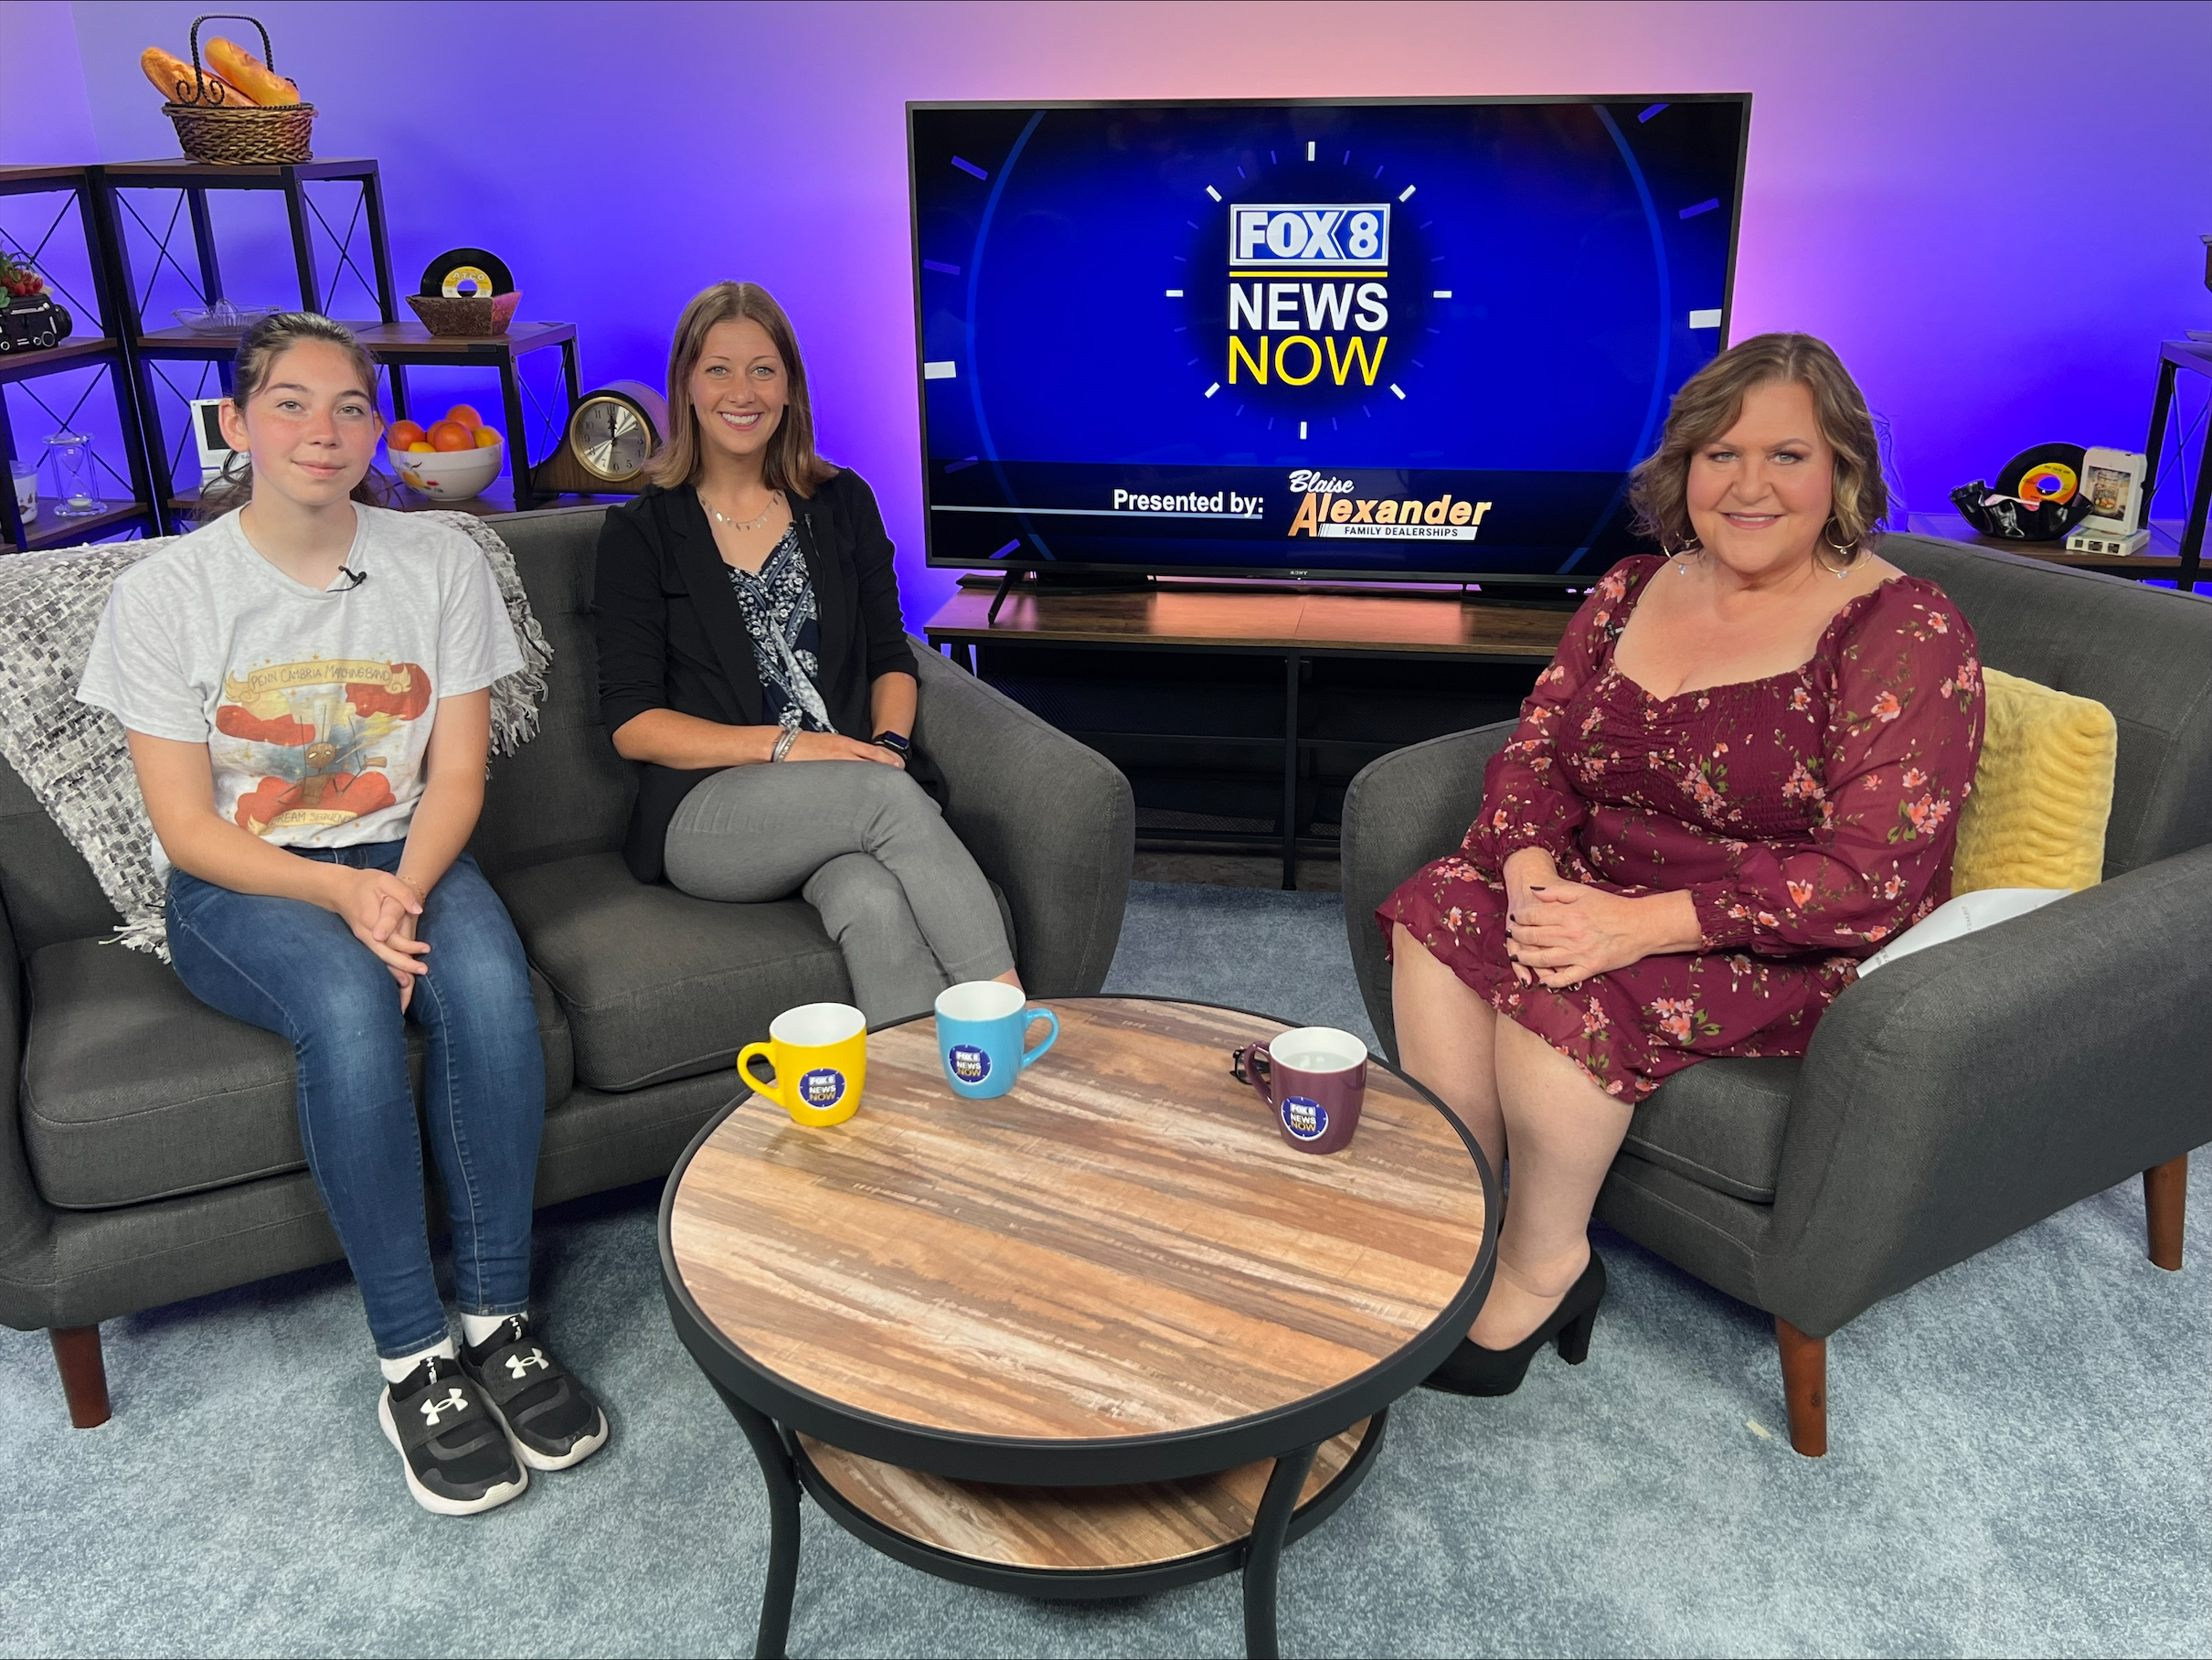 Mrs. Stombaugh and Mya W. were featured on Fox 8 news in Johnstown to promote the upcoming Marching Band Festival at Veterans Park in Cresson on Sunday, August 27th.